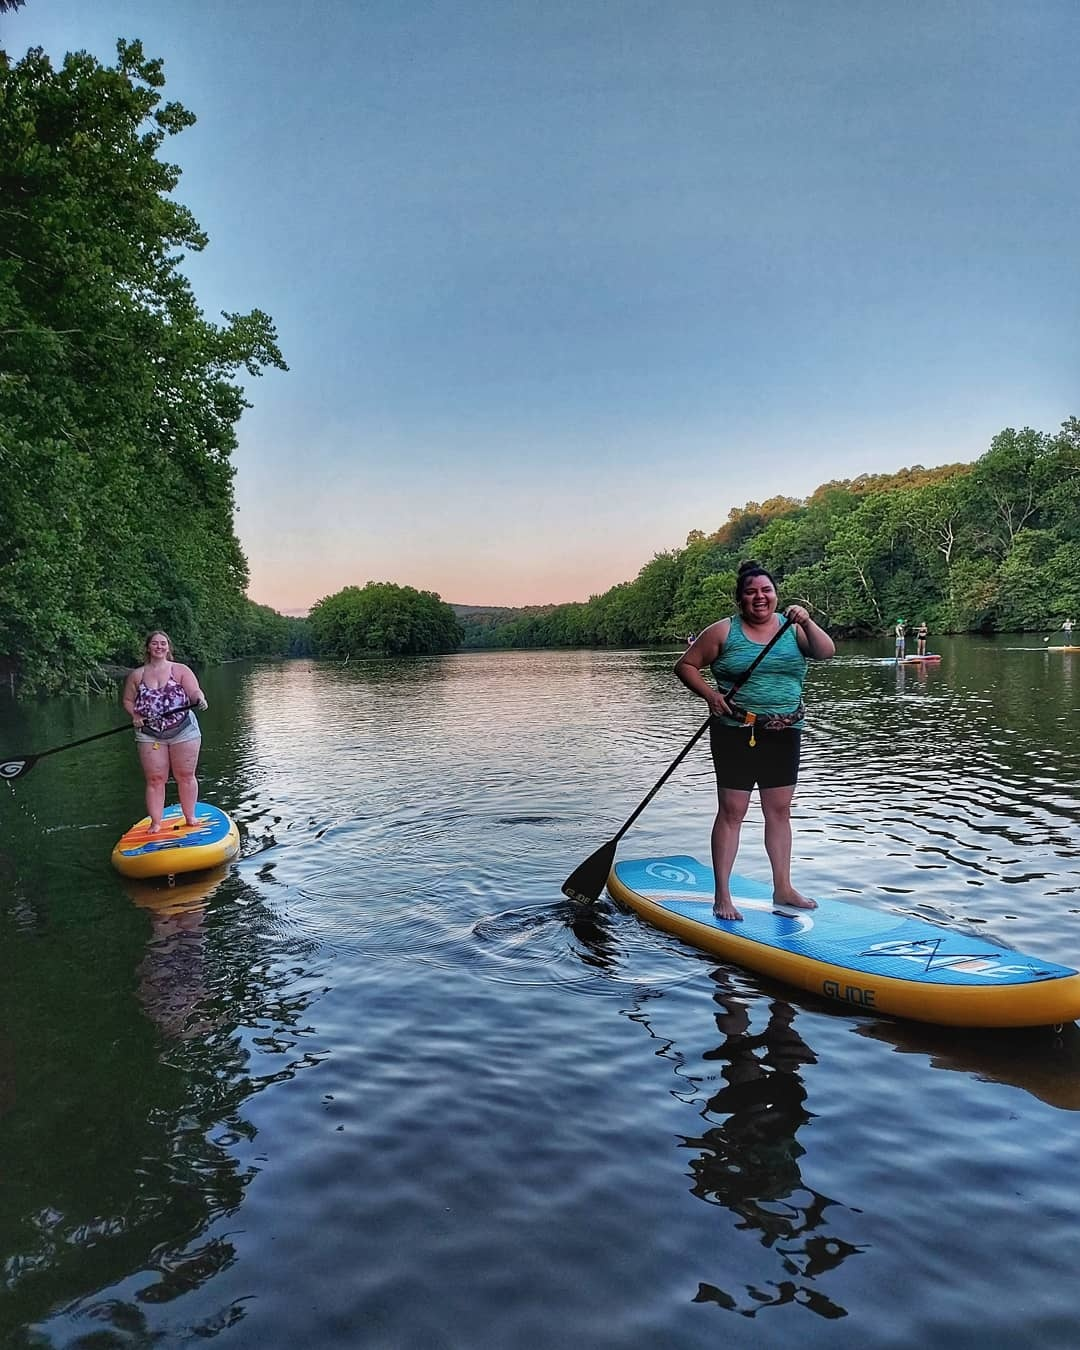 more advanced paddlers use an inflatable stand up paddle board and other boards